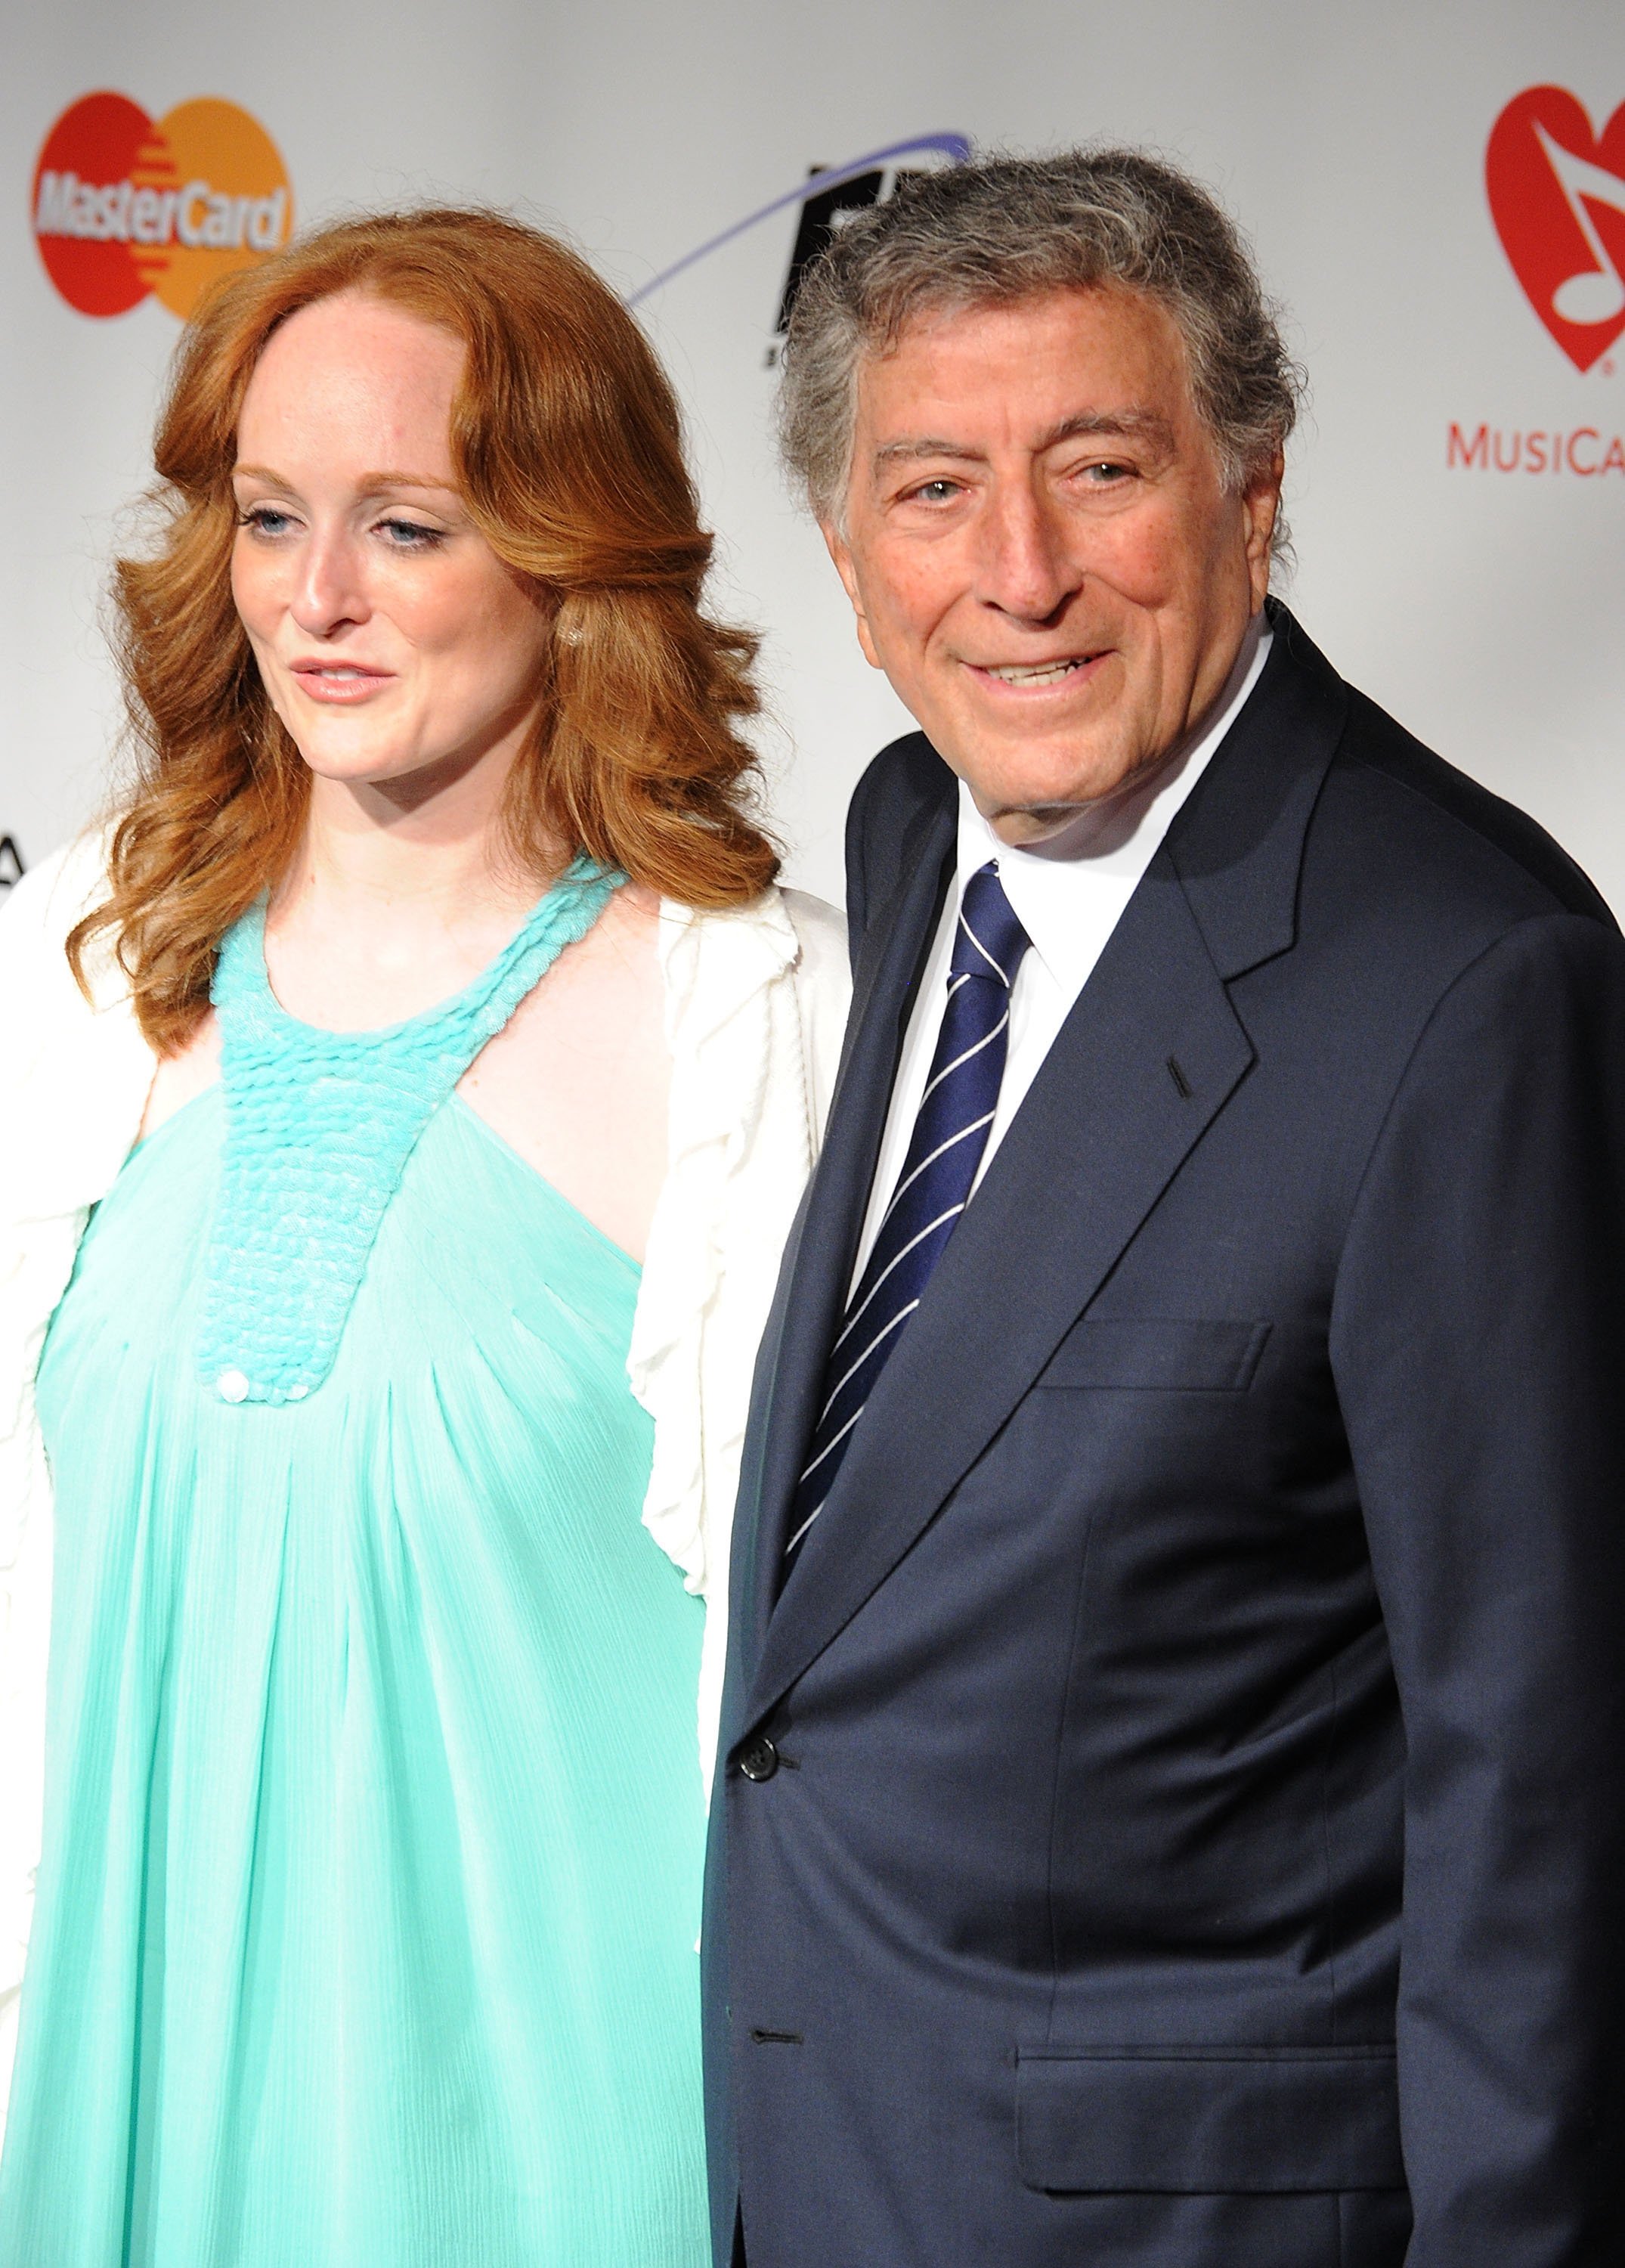 Tony Bennett and daughter Antonia Bennett arrive at the 2010 MusiCares Person Of The Year Tribute To Neil Young at the Los Angeles Convention Center on January 29, 2010, in Los Angeles, California. | Source: Getty Images